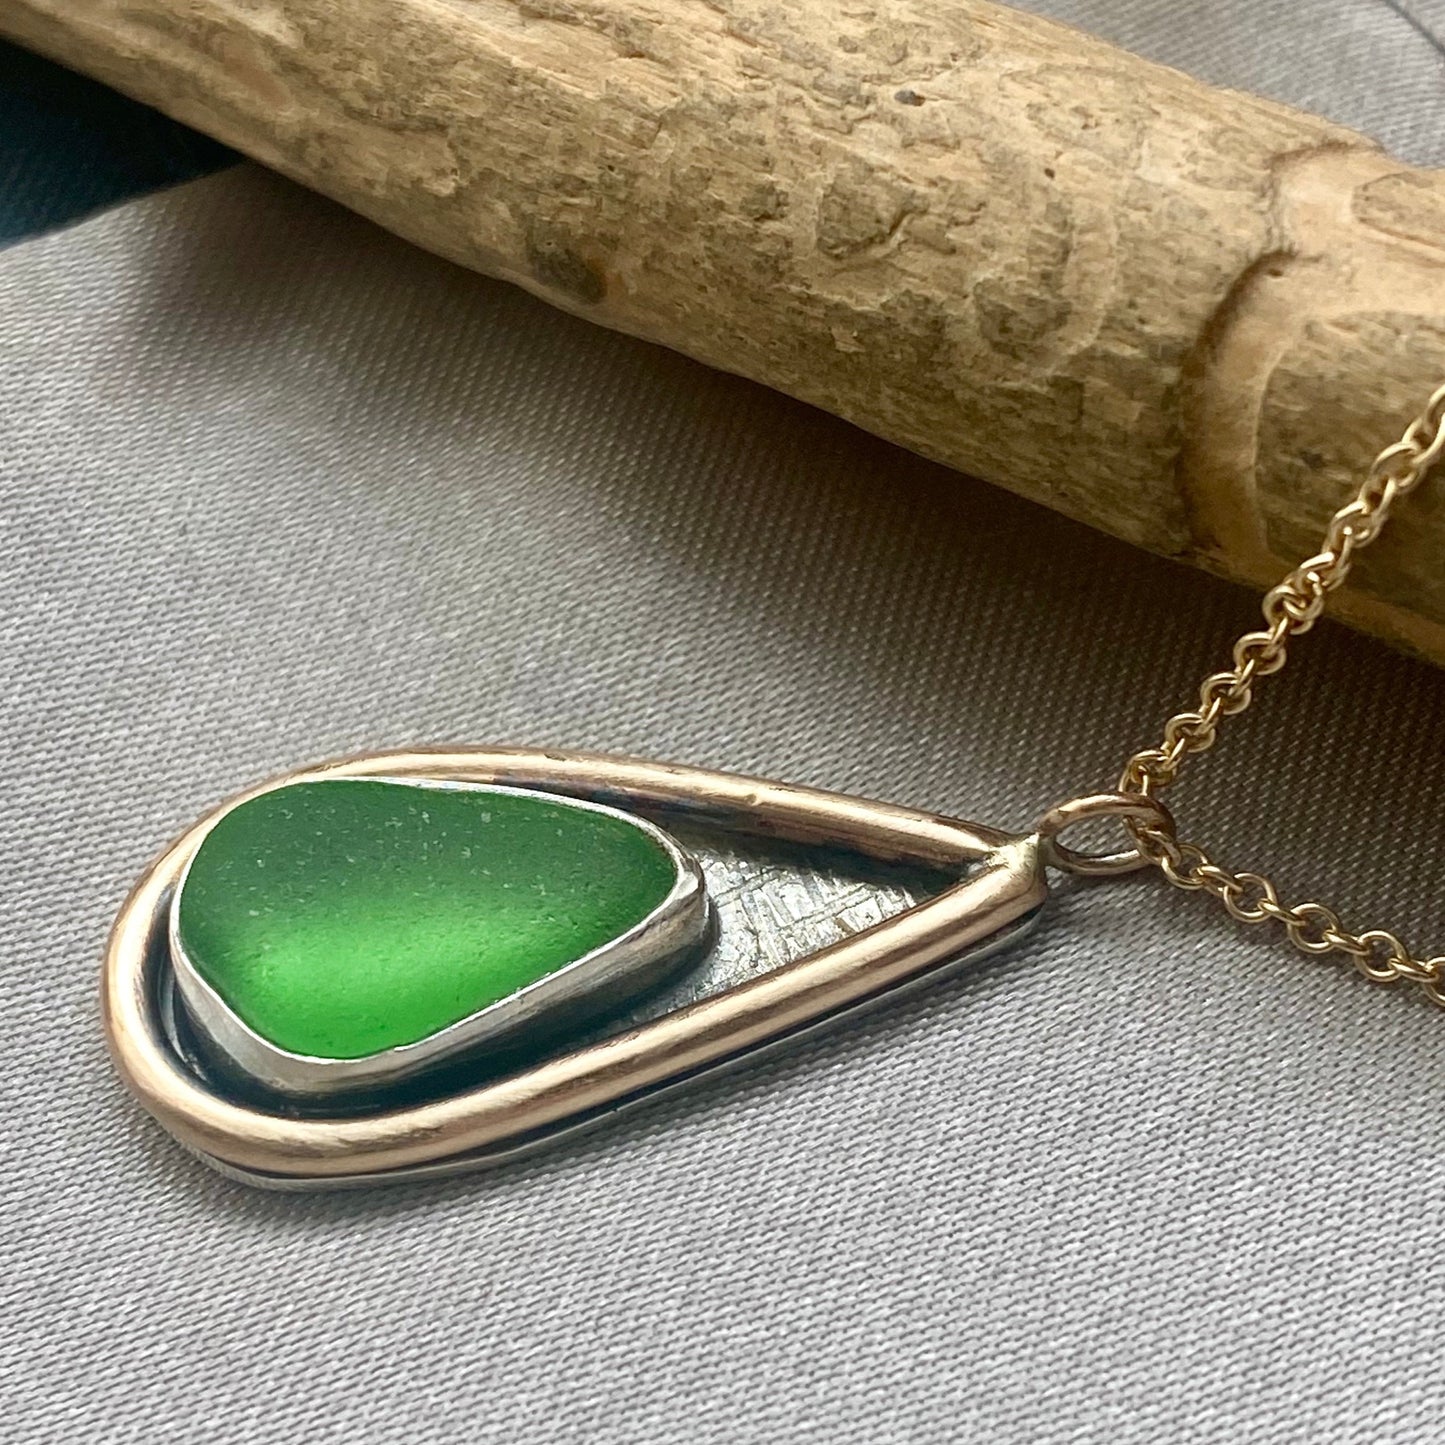 The Mermaid Tail Pendant - The Mermaid Tail Necklace. Beautiful piece of sea glass nested in a hand-crafted in a sterling silver bezel with 14k gold fill accents. Kate Samson Design